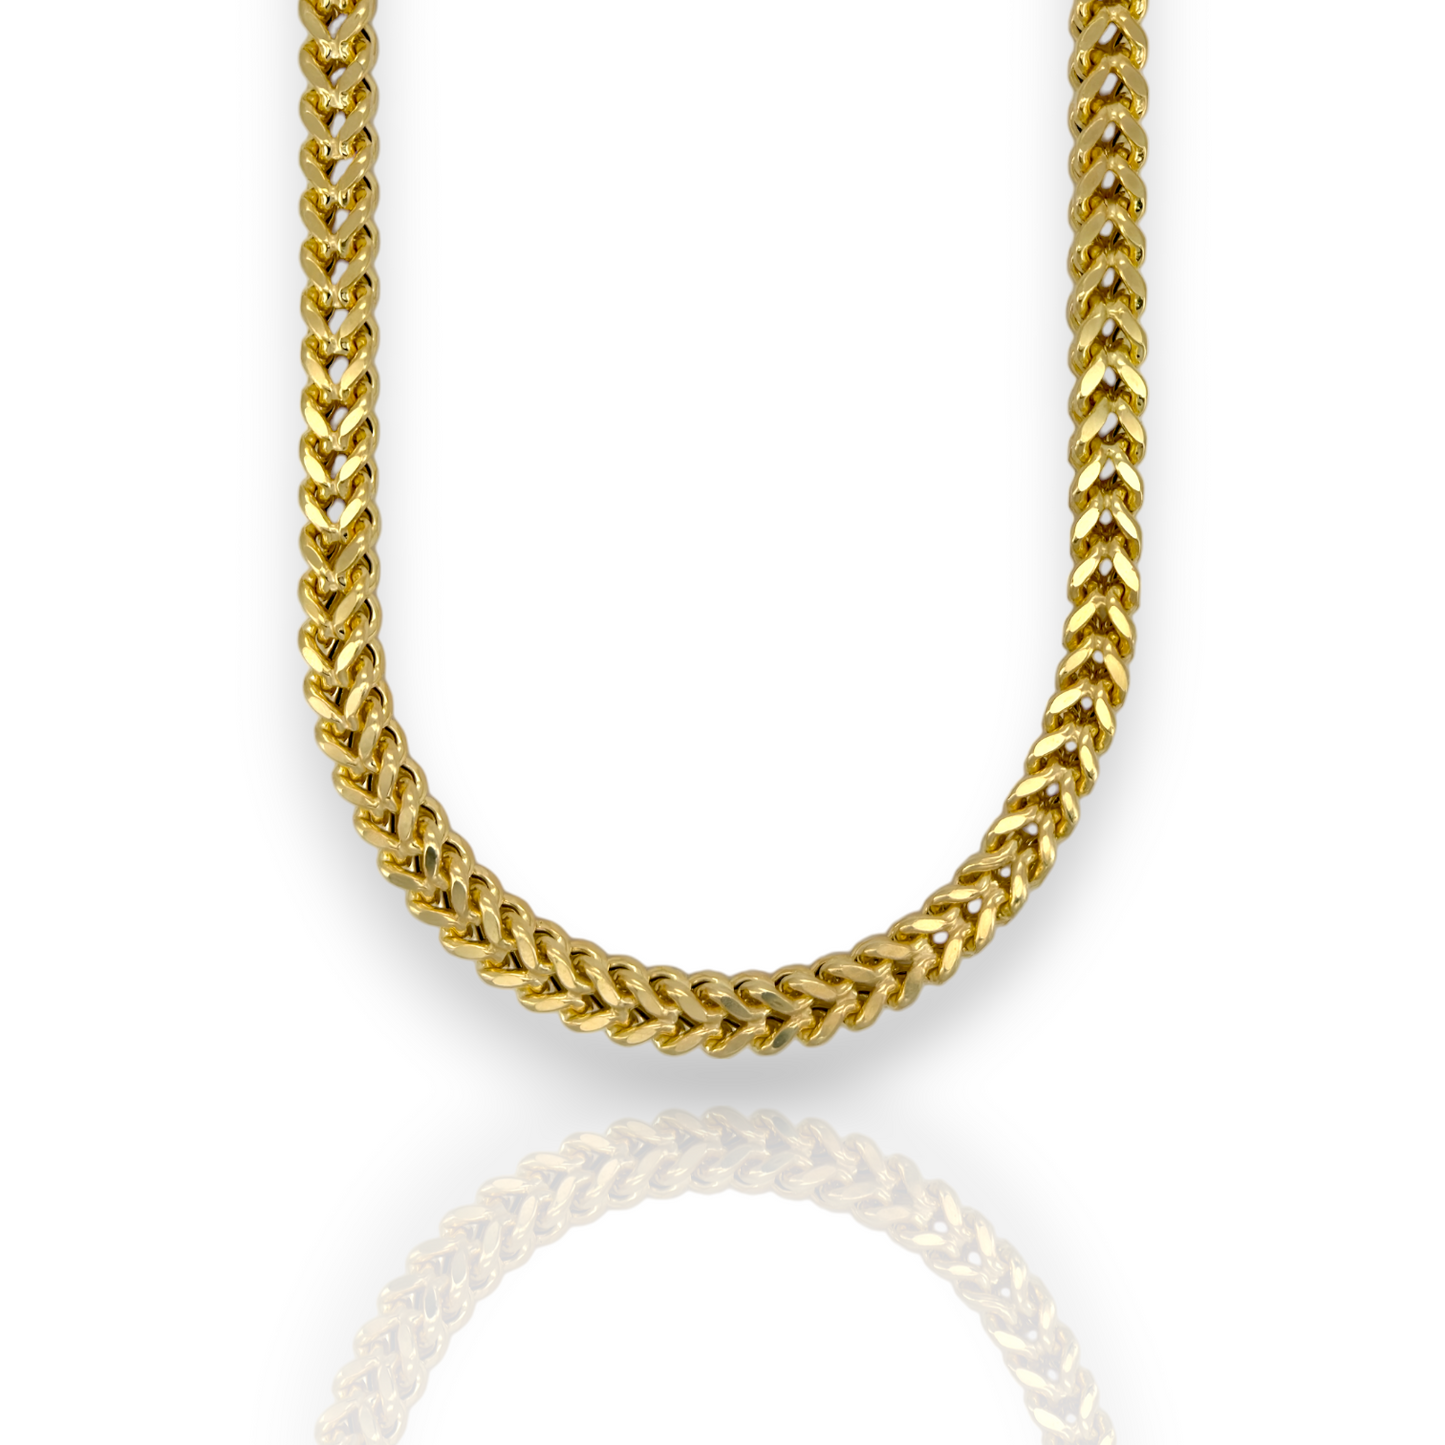 Franco Box Chain Necklace - 10K Yellow Gold - Hallow